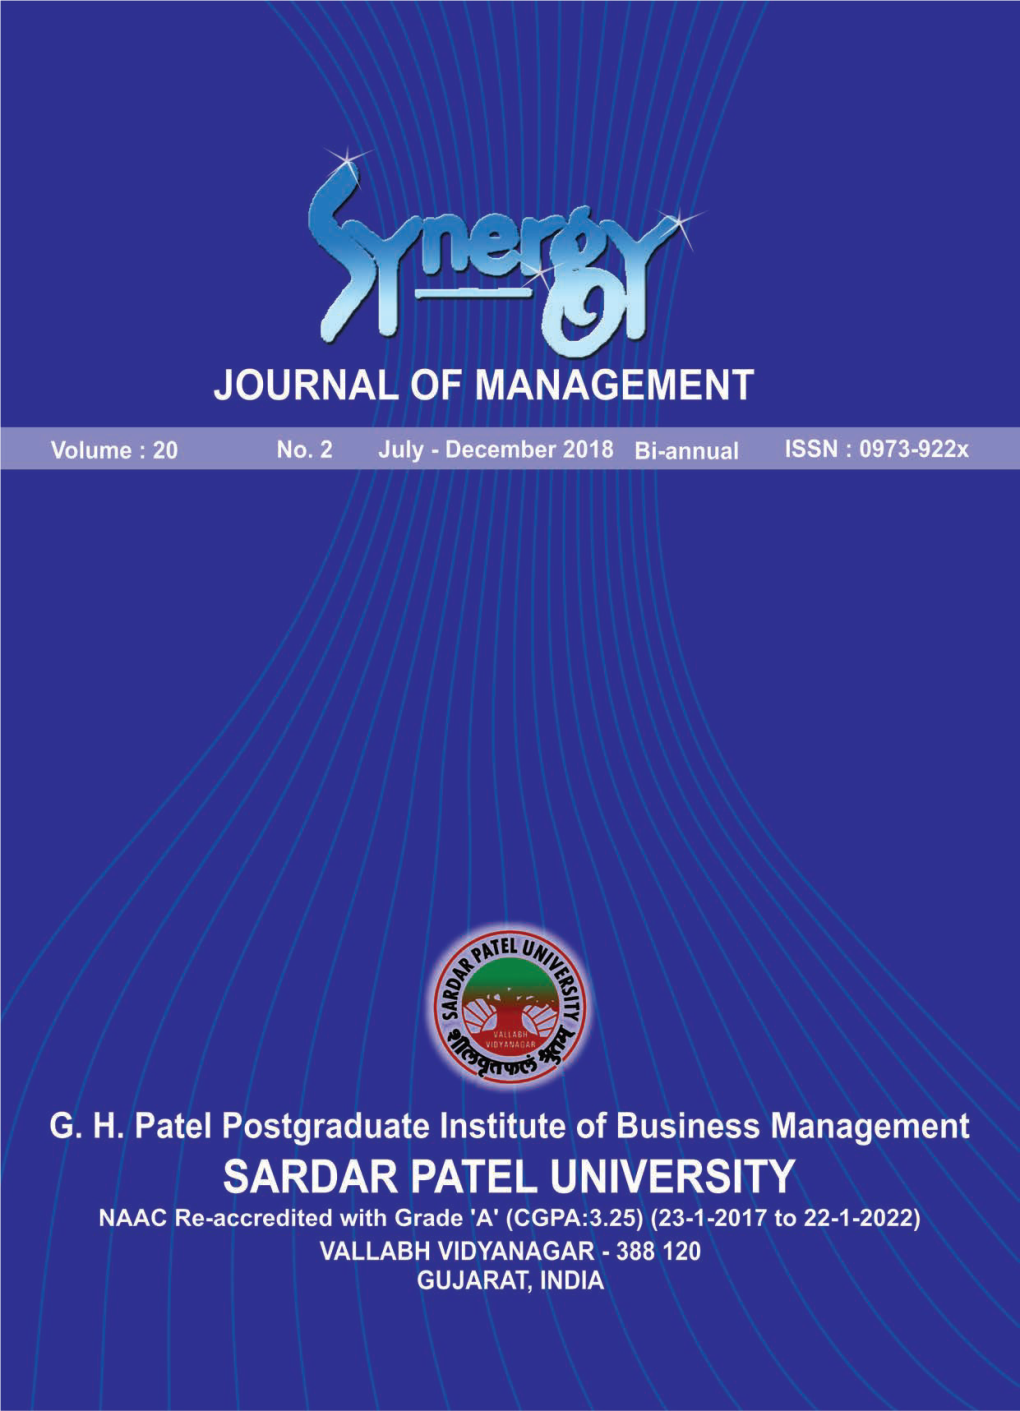 Synergy Journal of Management